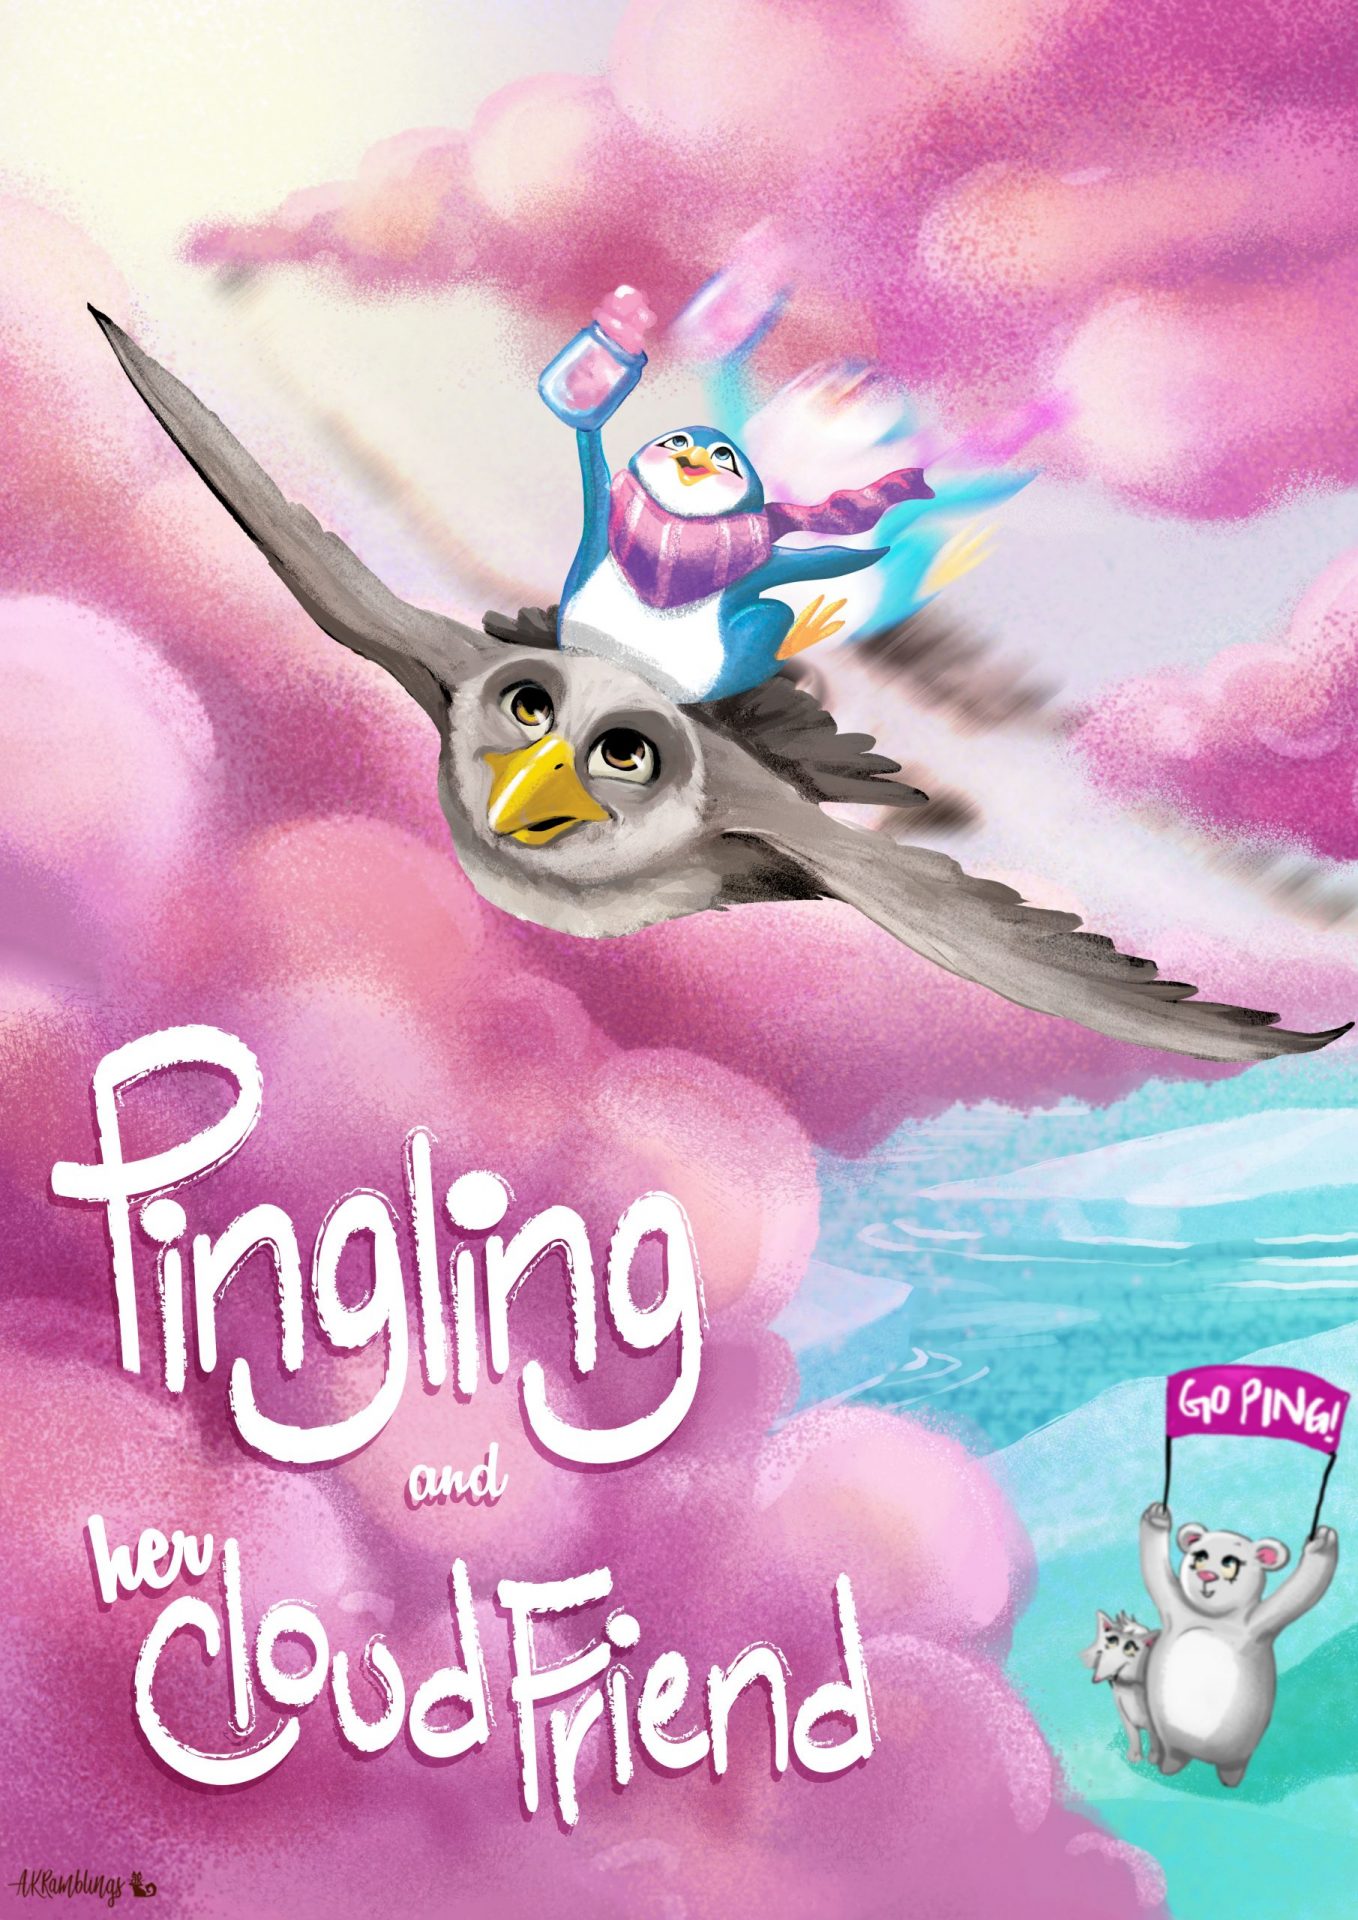 Pingling and her Cloud Friend